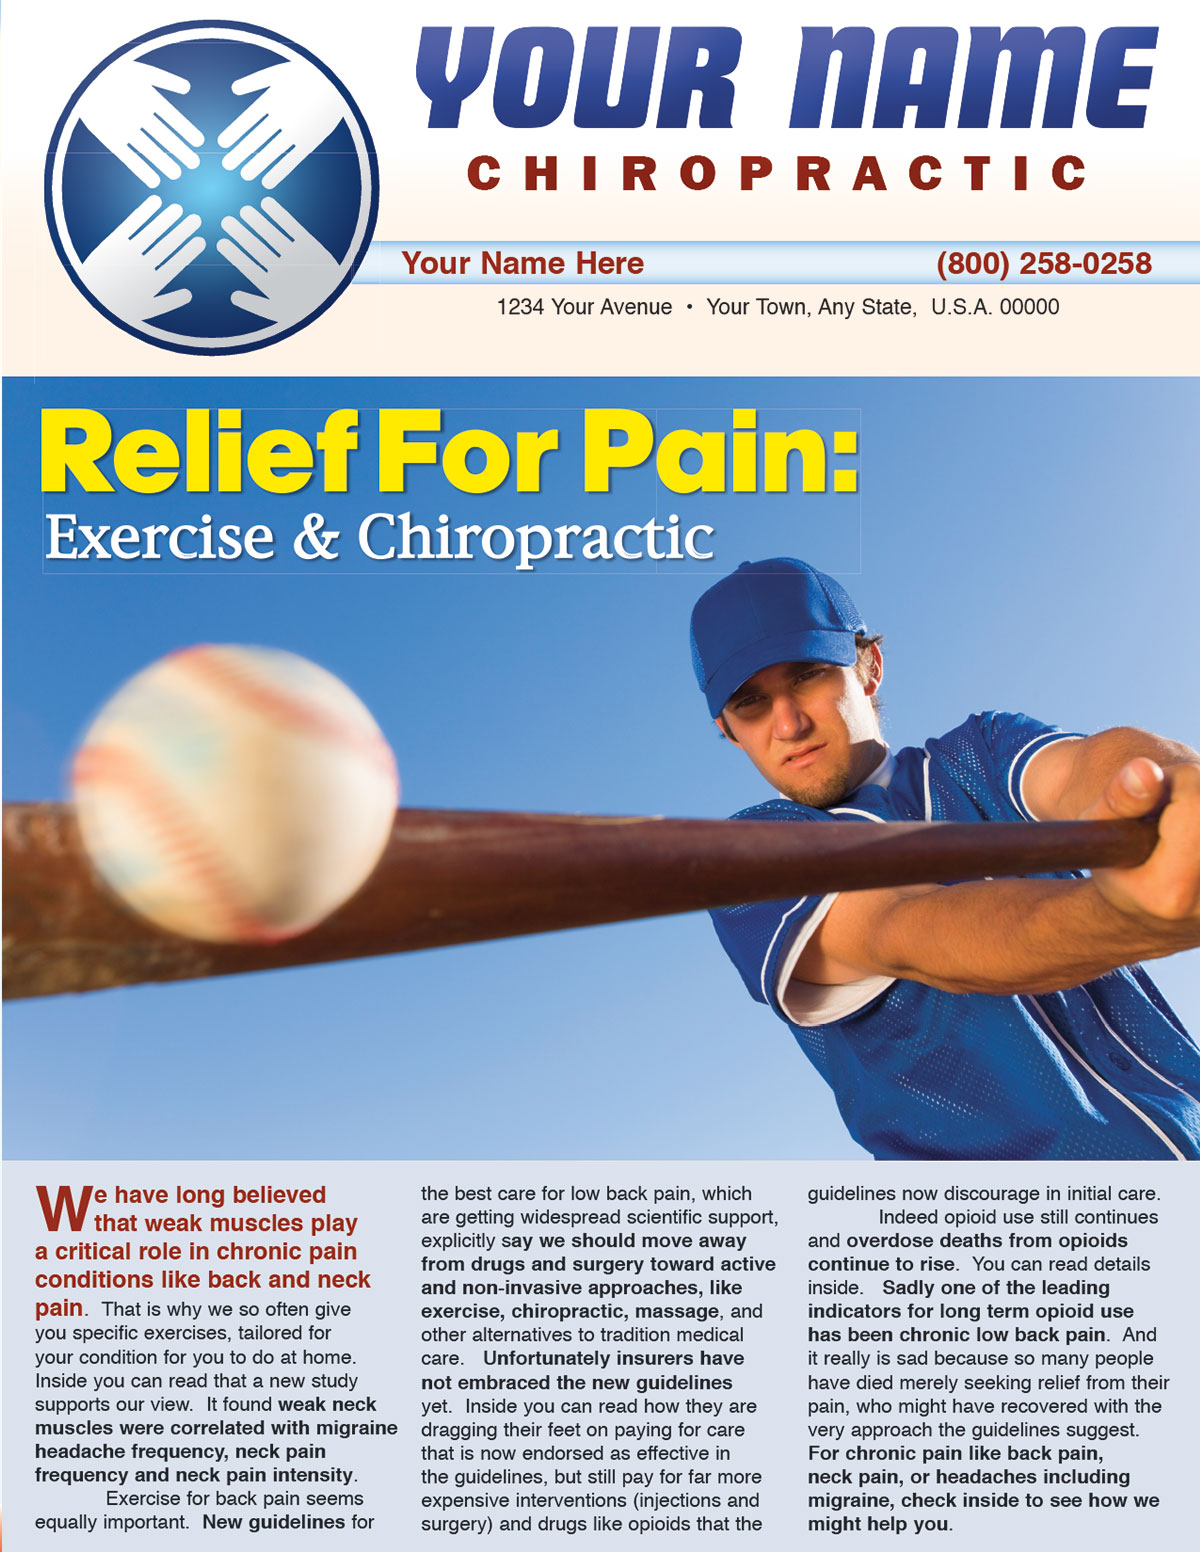 Relief for Pain: Exercise and Chiropractic